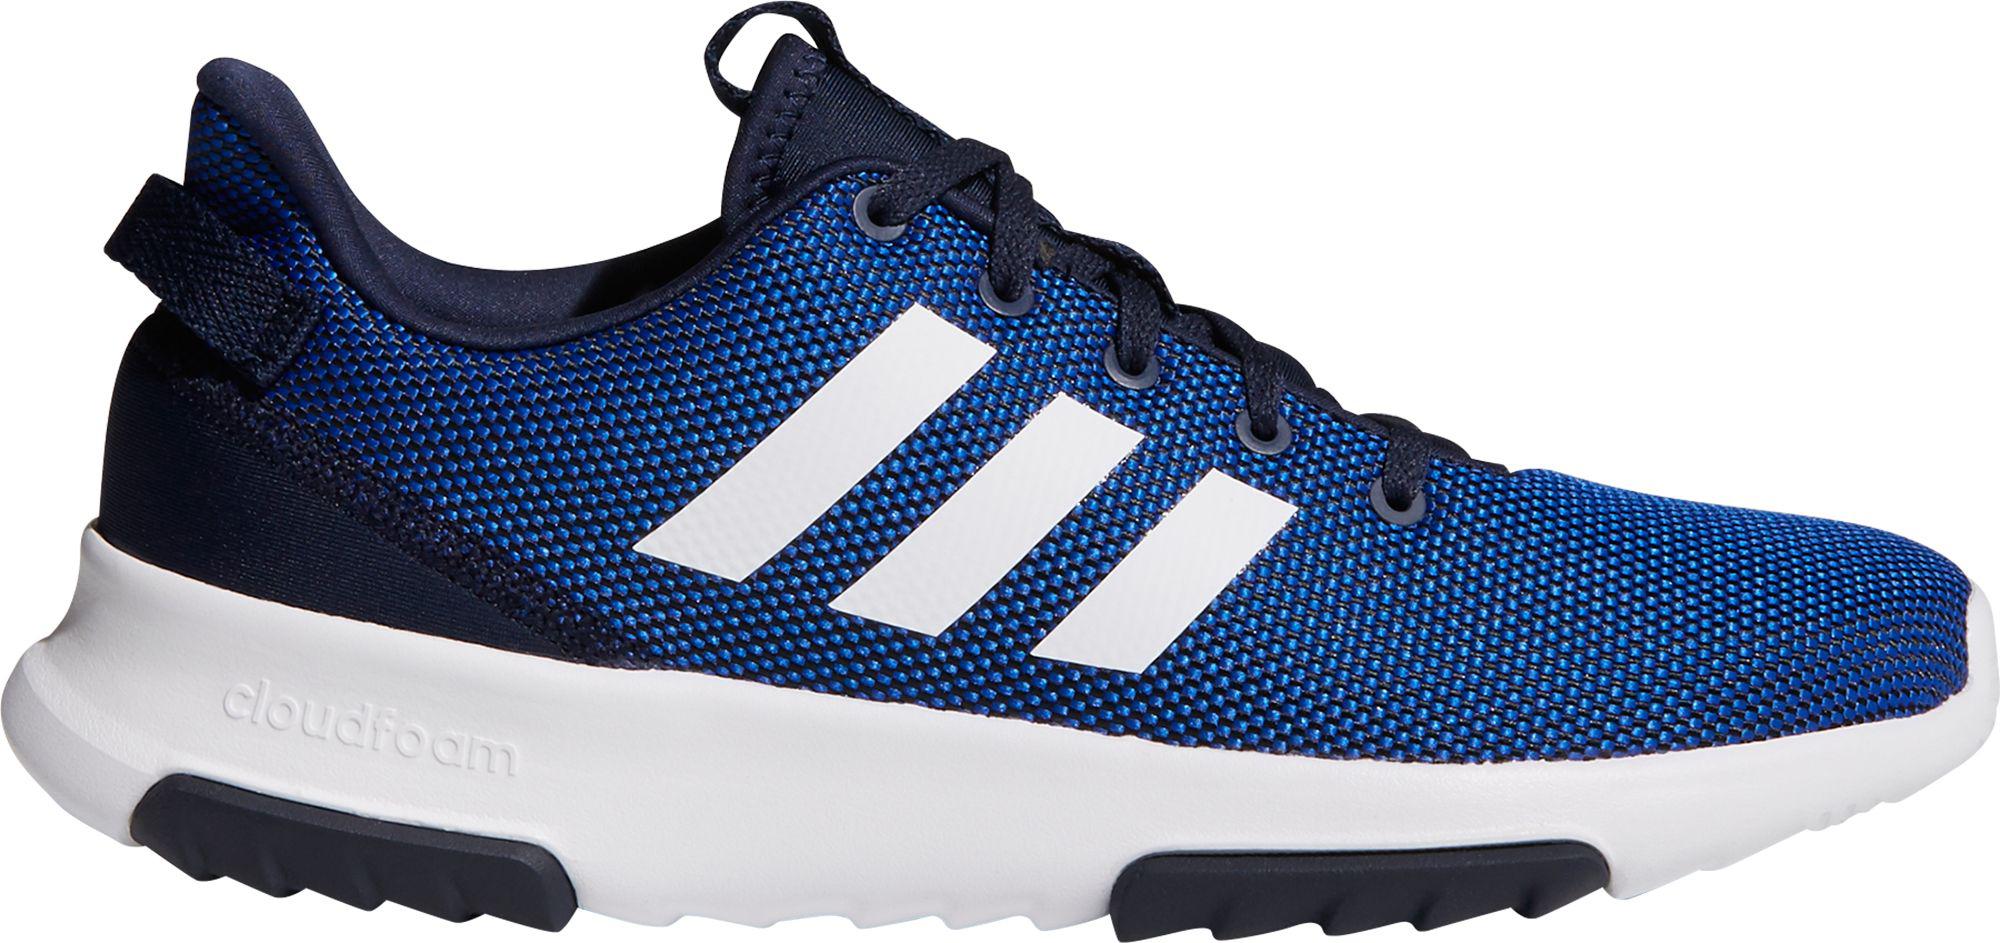 adidas Rubber Cf Racer Tr in Blue/Black 